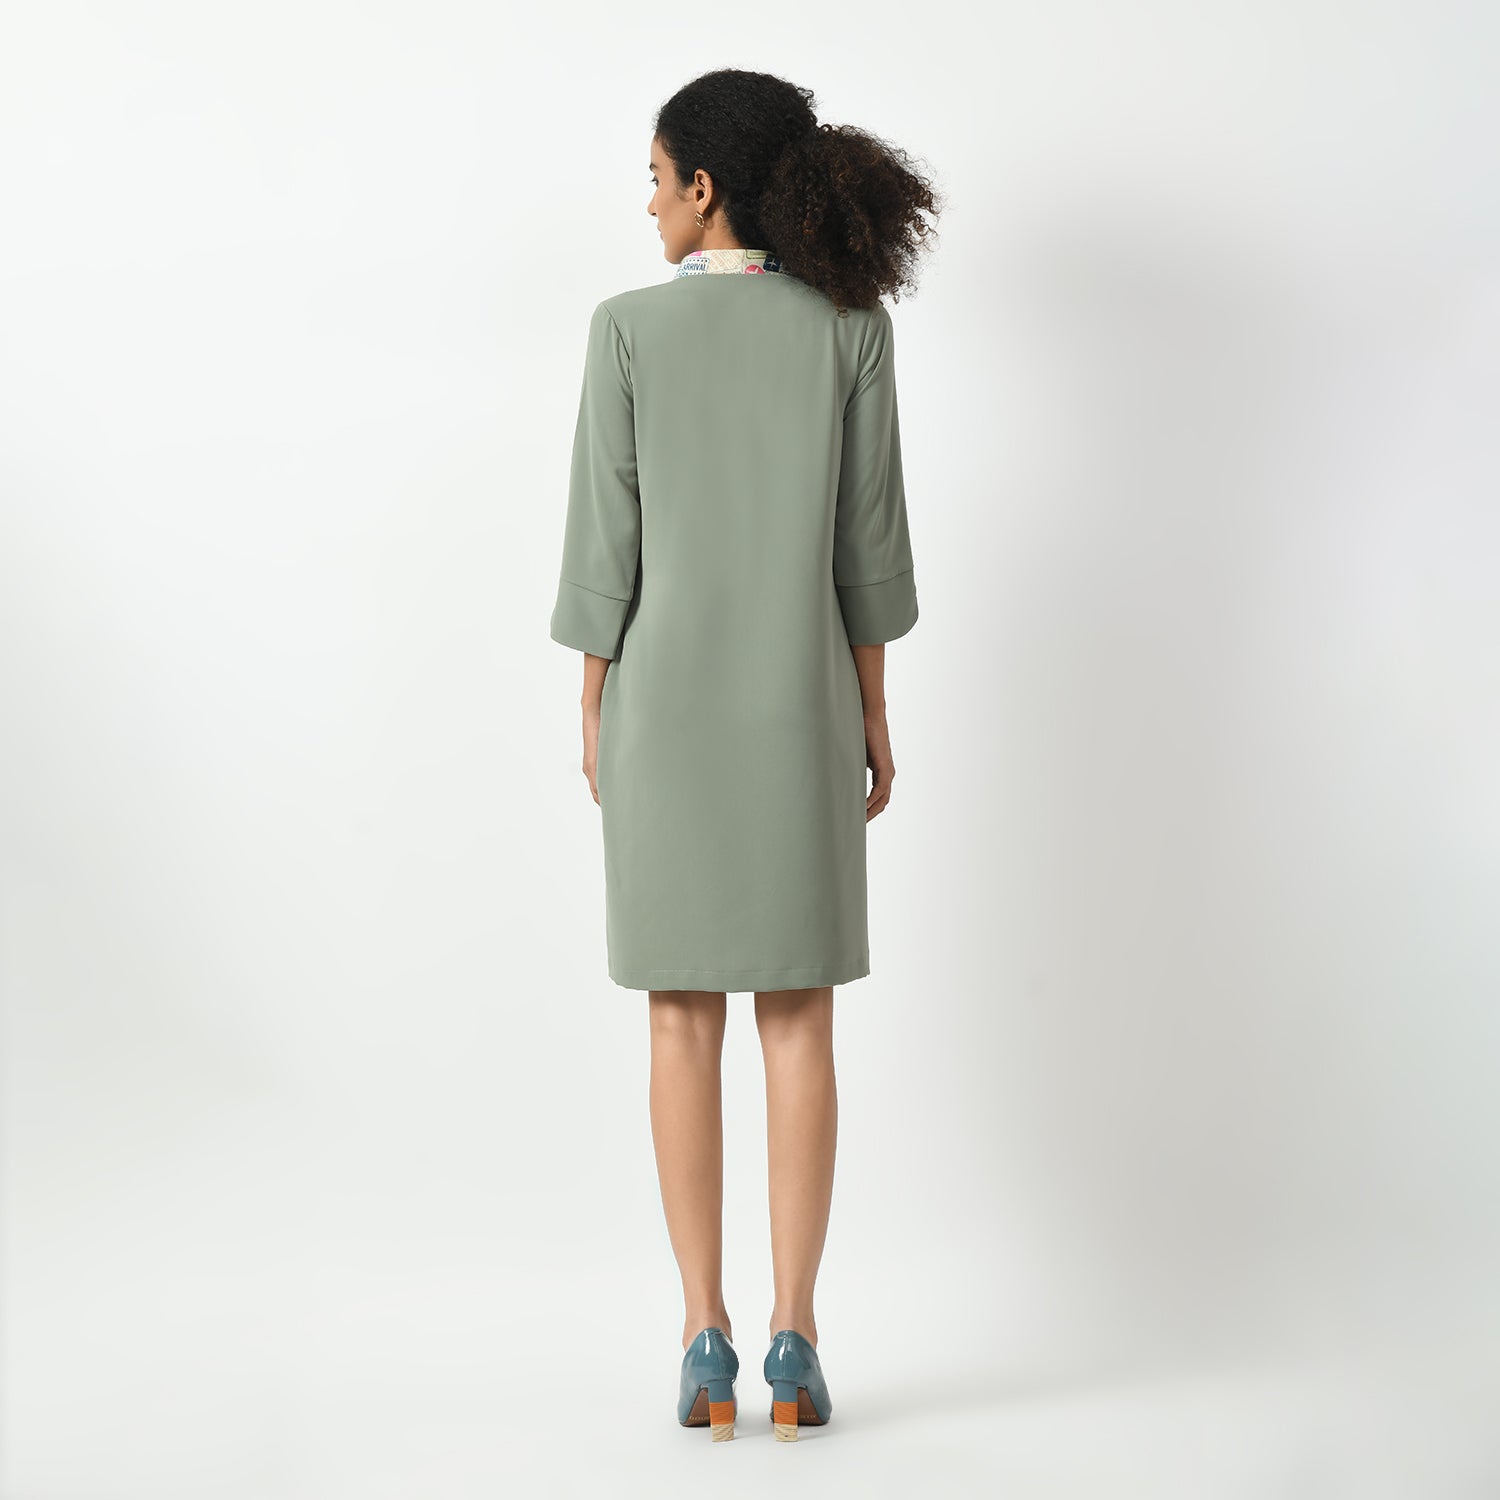 Dusty Green Dress With Tie Knot Collar